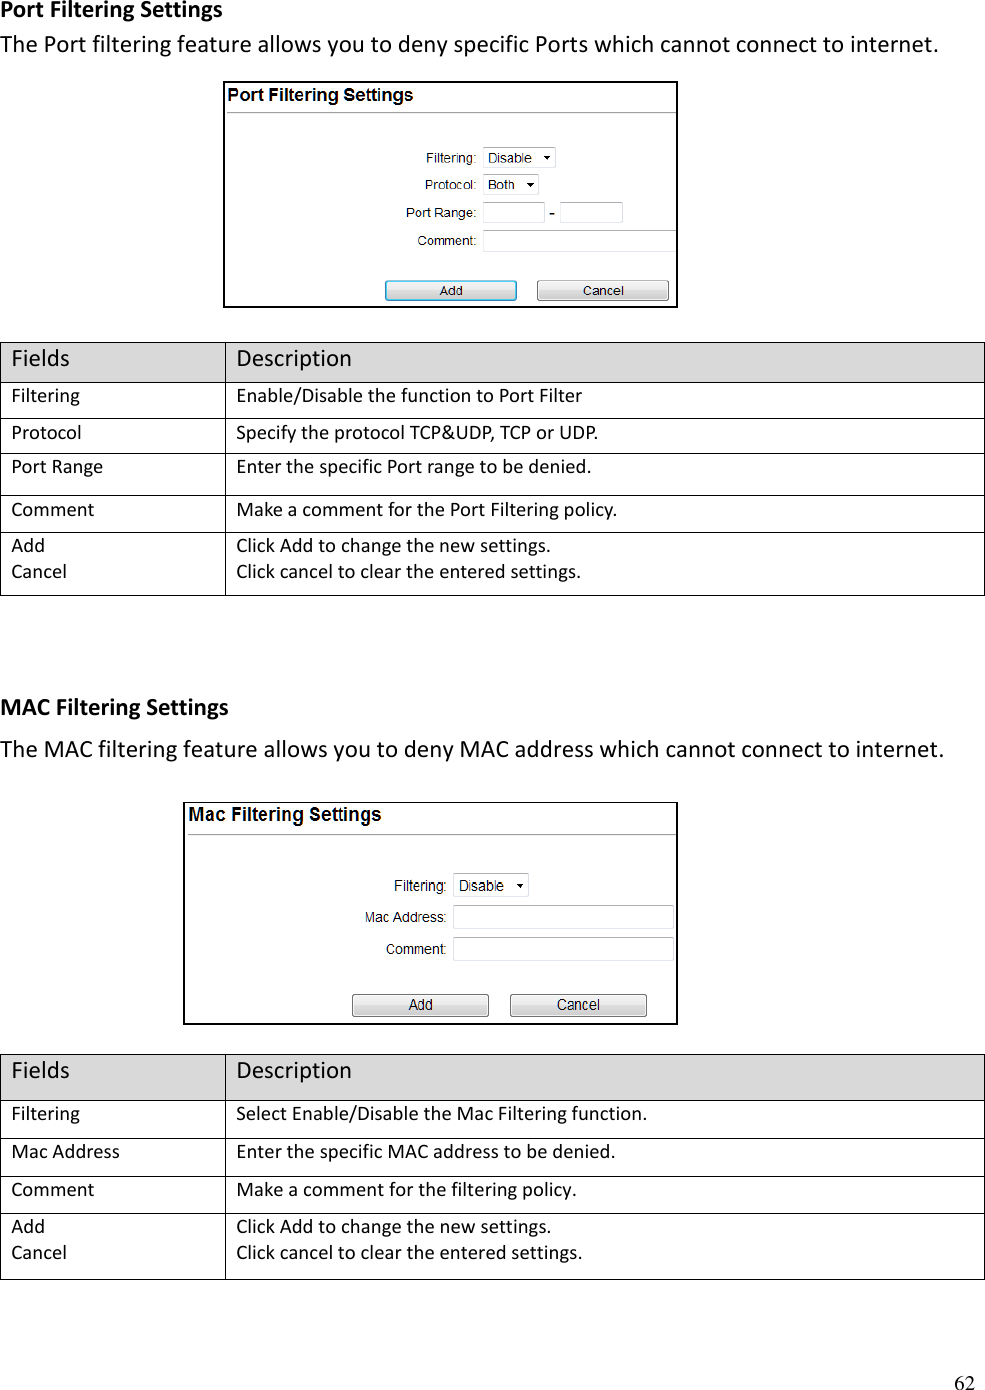 62  Port Filtering Settings The Port filtering feature allows you to deny specific Ports which cannot connect to internet.       Fields Description Filtering Enable/Disable the function to Port Filter Protocol Specify the protocol TCP&amp;UDP, TCP or UDP. Port Range Enter the specific Port range to be denied. Comment Make a comment for the Port Filtering policy. Add Cancel Click Add to change the new settings. Click cancel to clear the entered settings.    MAC Filtering Settings The MAC filtering feature allows you to deny MAC address which cannot connect to internet.      Fields Description Filtering Select Enable/Disable the Mac Filtering function.  Mac Address Enter the specific MAC address to be denied.  Comment Make a comment for the filtering policy.  Add  Cancel Click Add to change the new settings. Click cancel to clear the entered settings.   